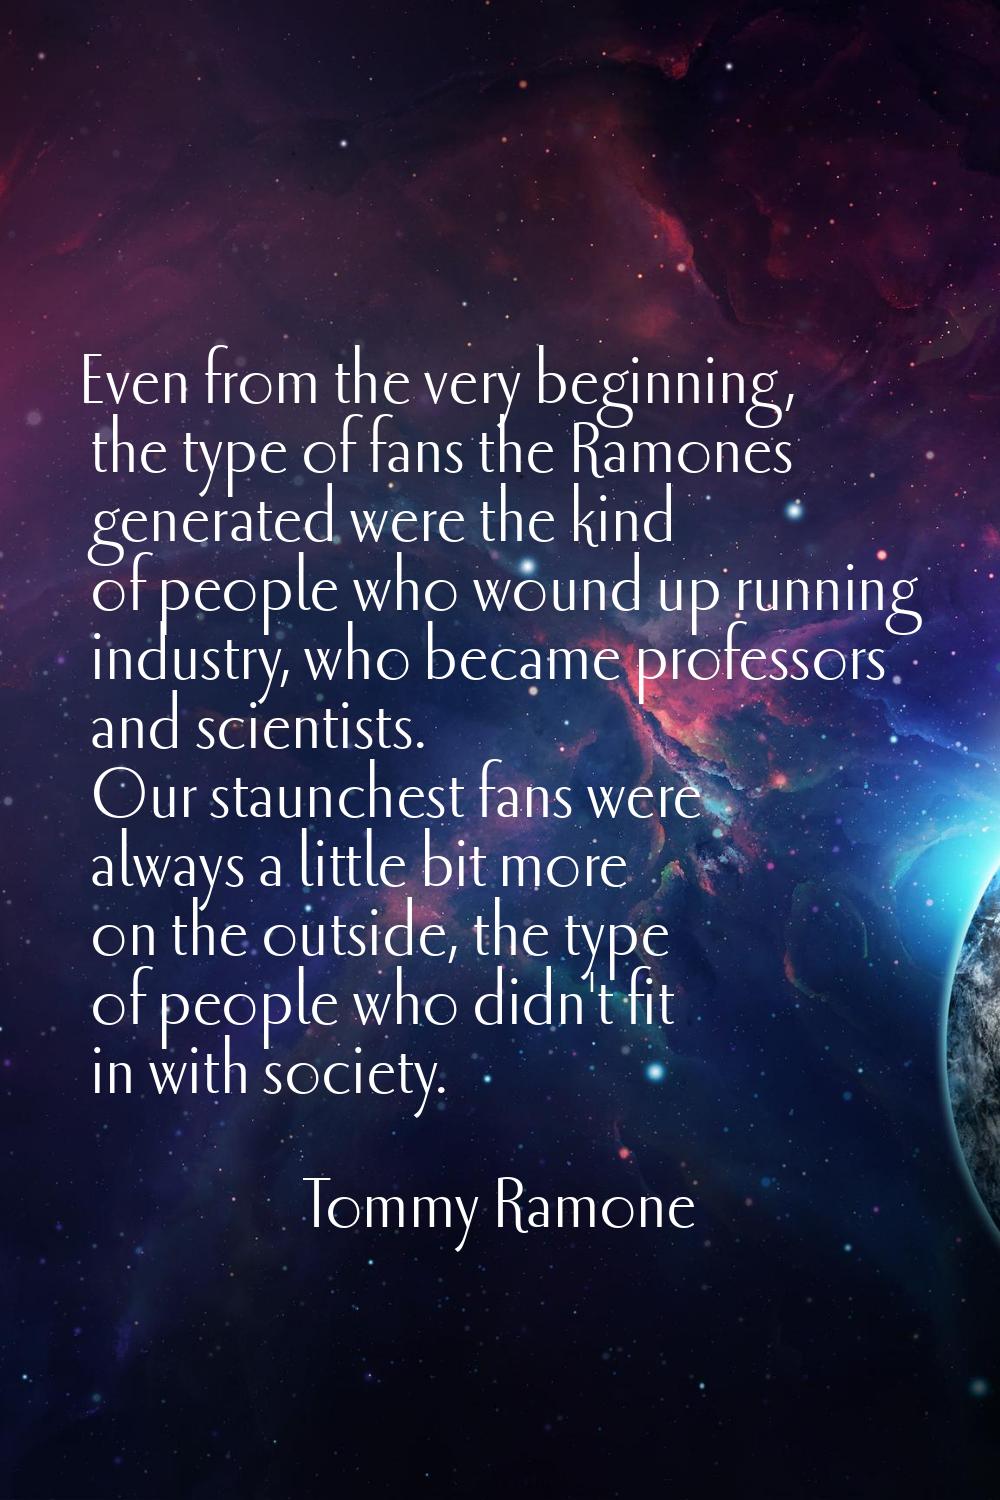 Even from the very beginning, the type of fans the Ramones generated were the kind of people who wo